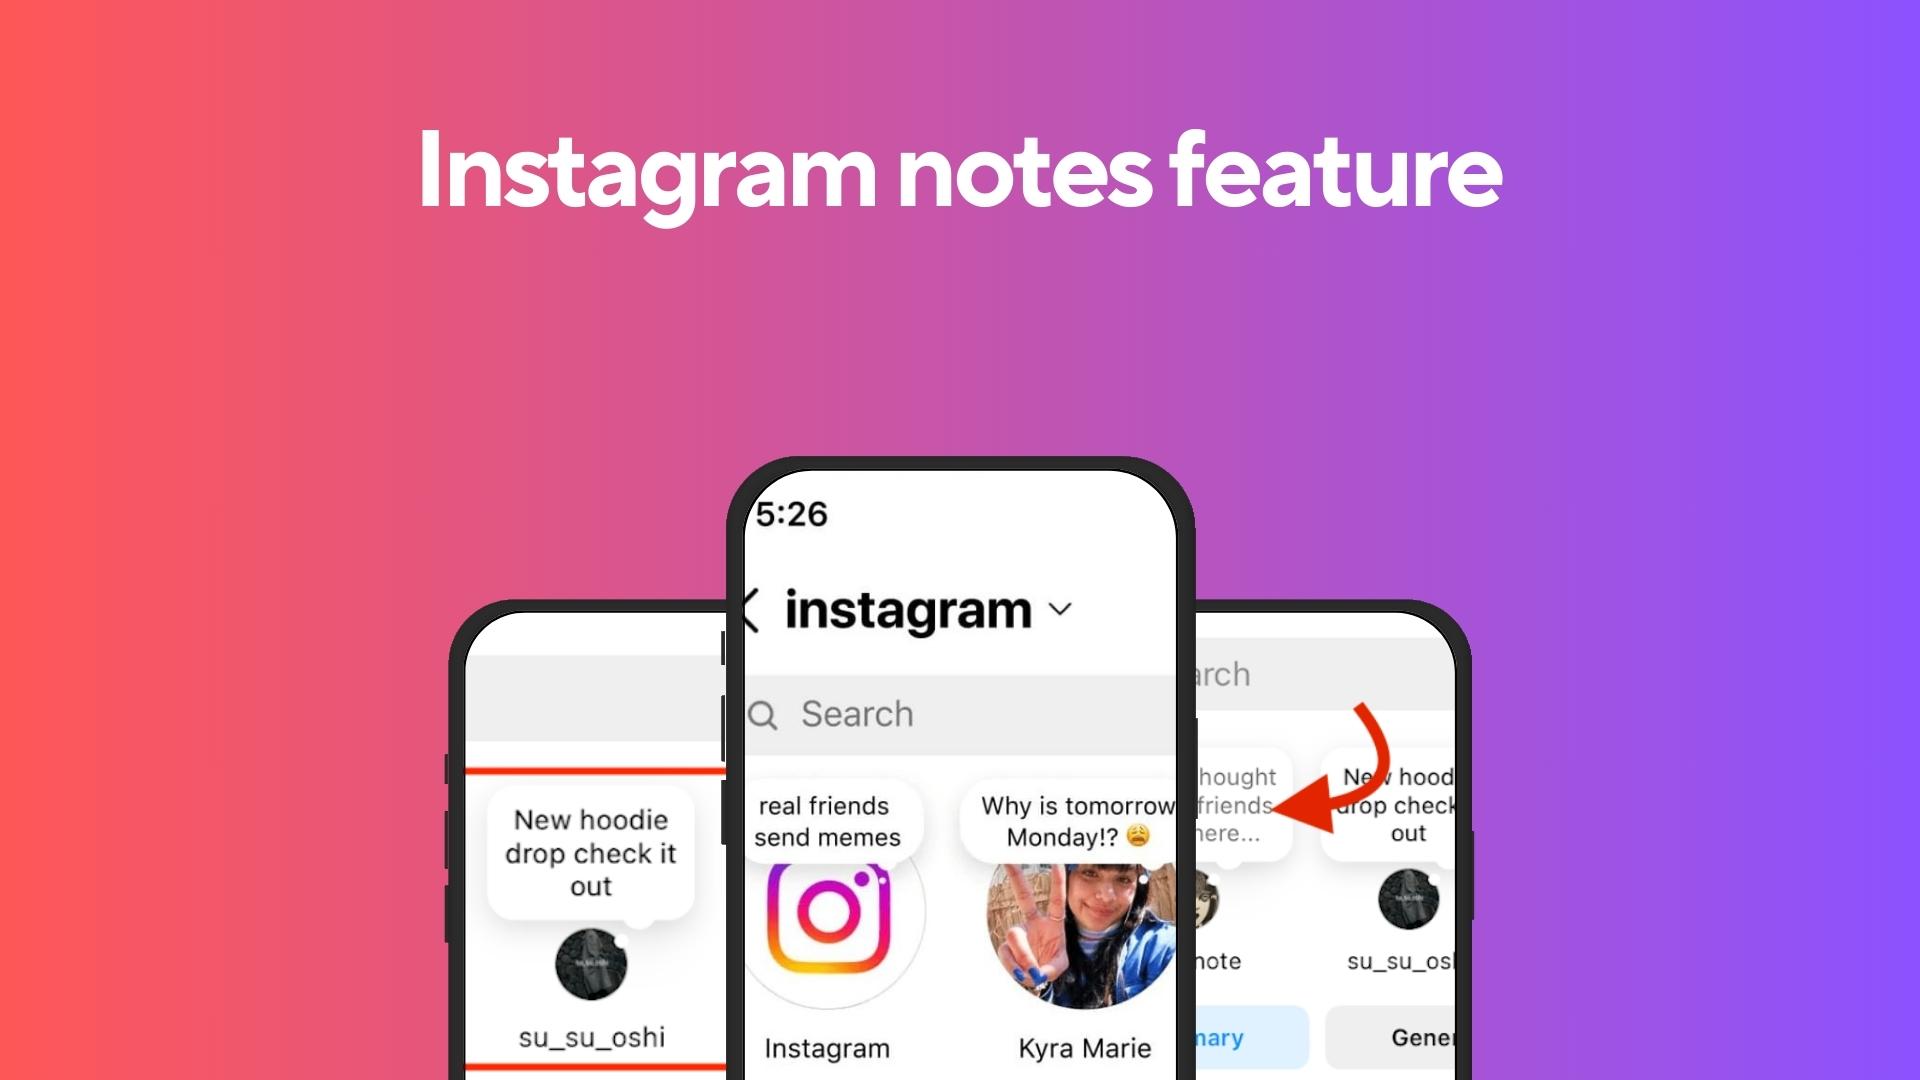 What is the Instagram notes feature? 